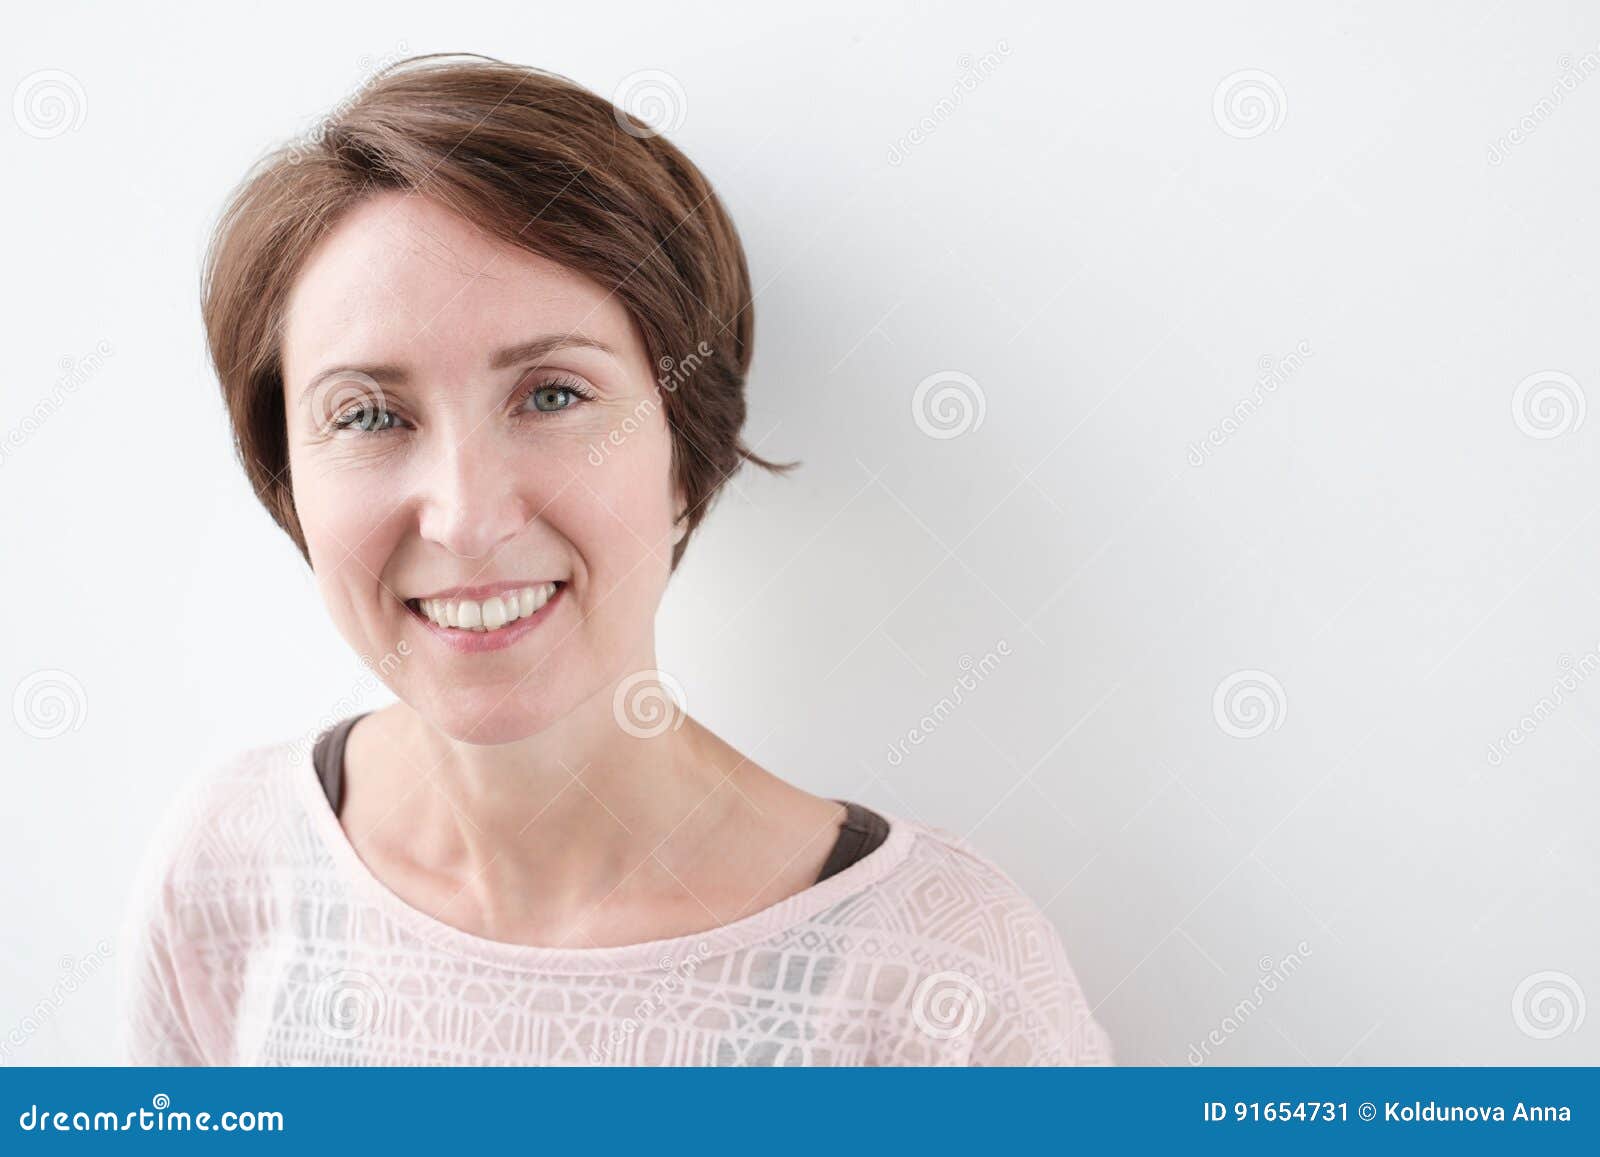 Portrait of Self-confident Woman in Casual Clothing Style. Stock Image ...